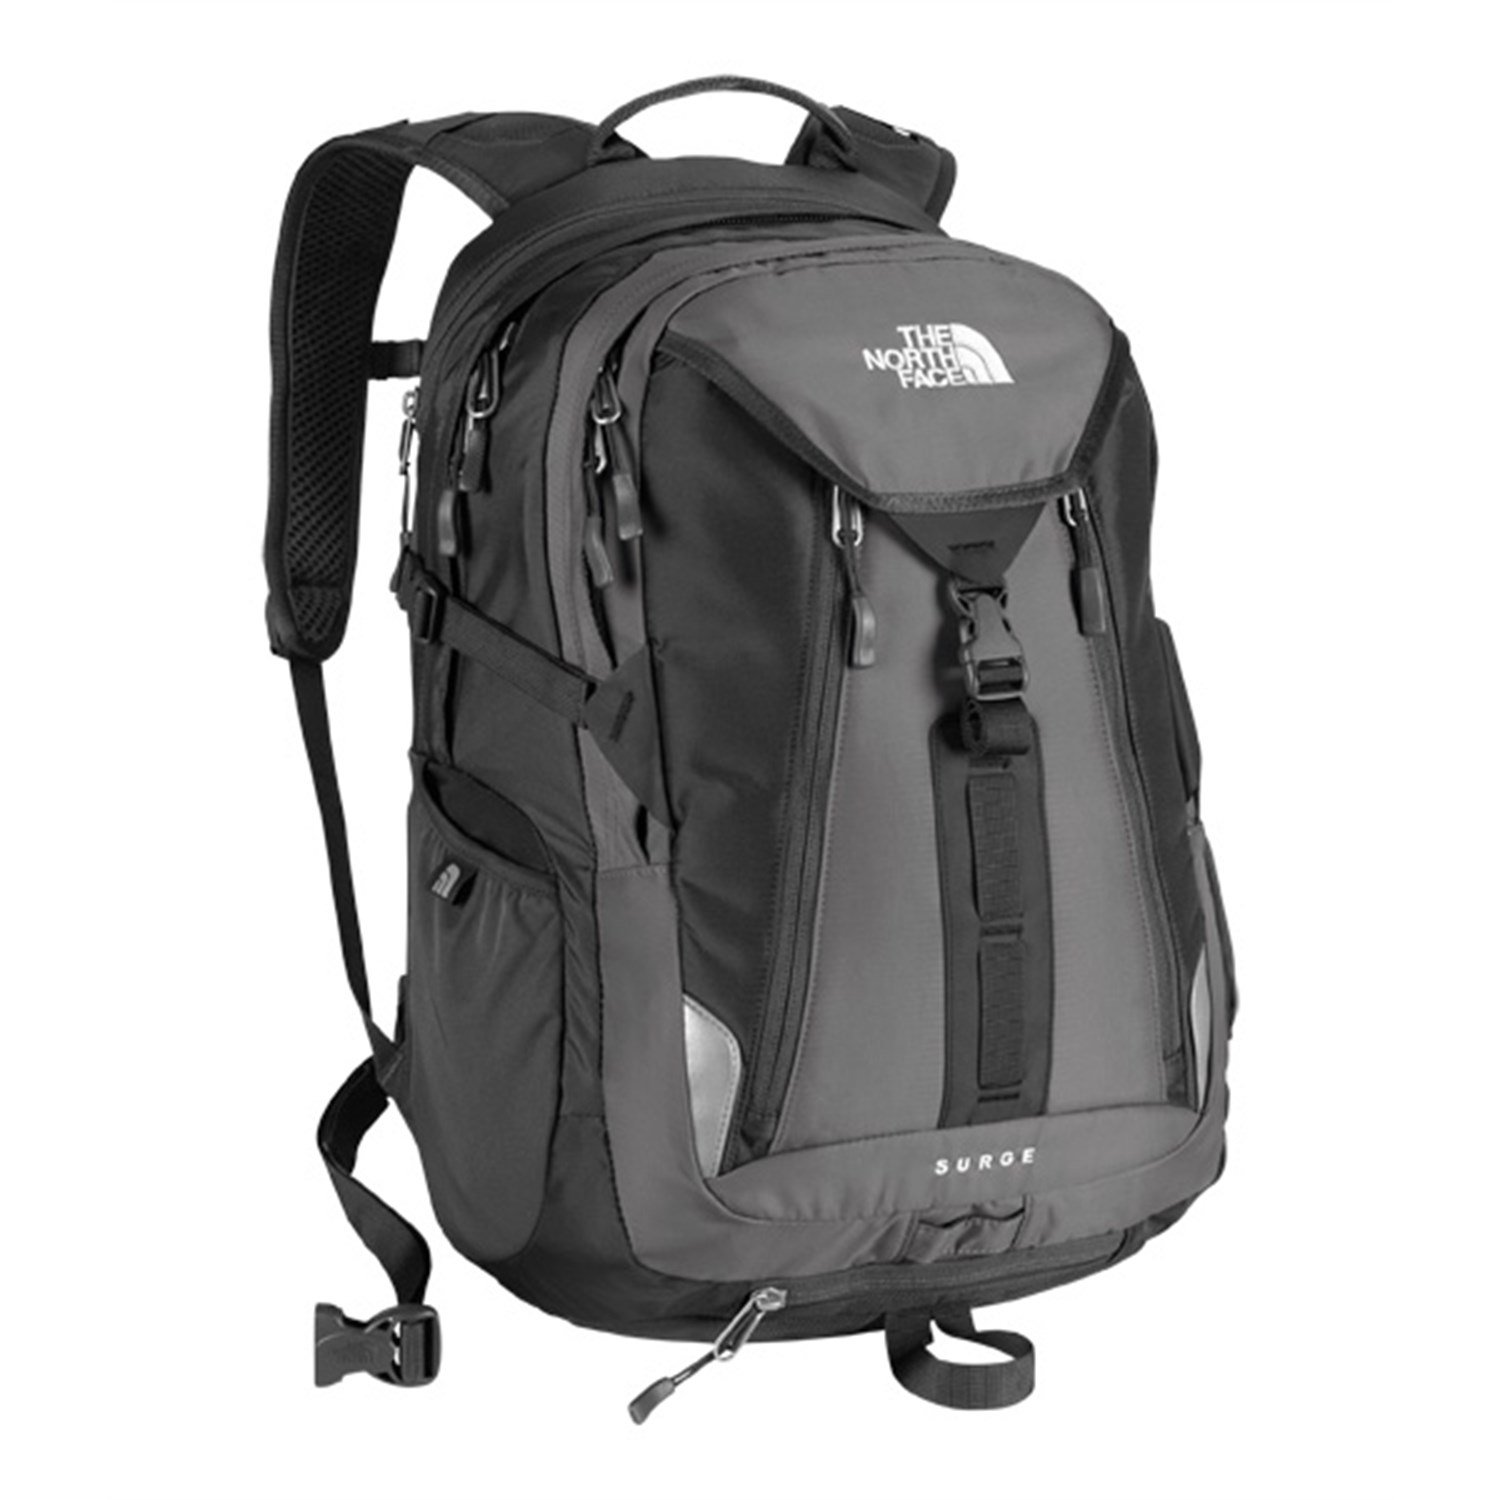 Buy backpacks online malaysia kkkl, north face backpack surge review, i ...